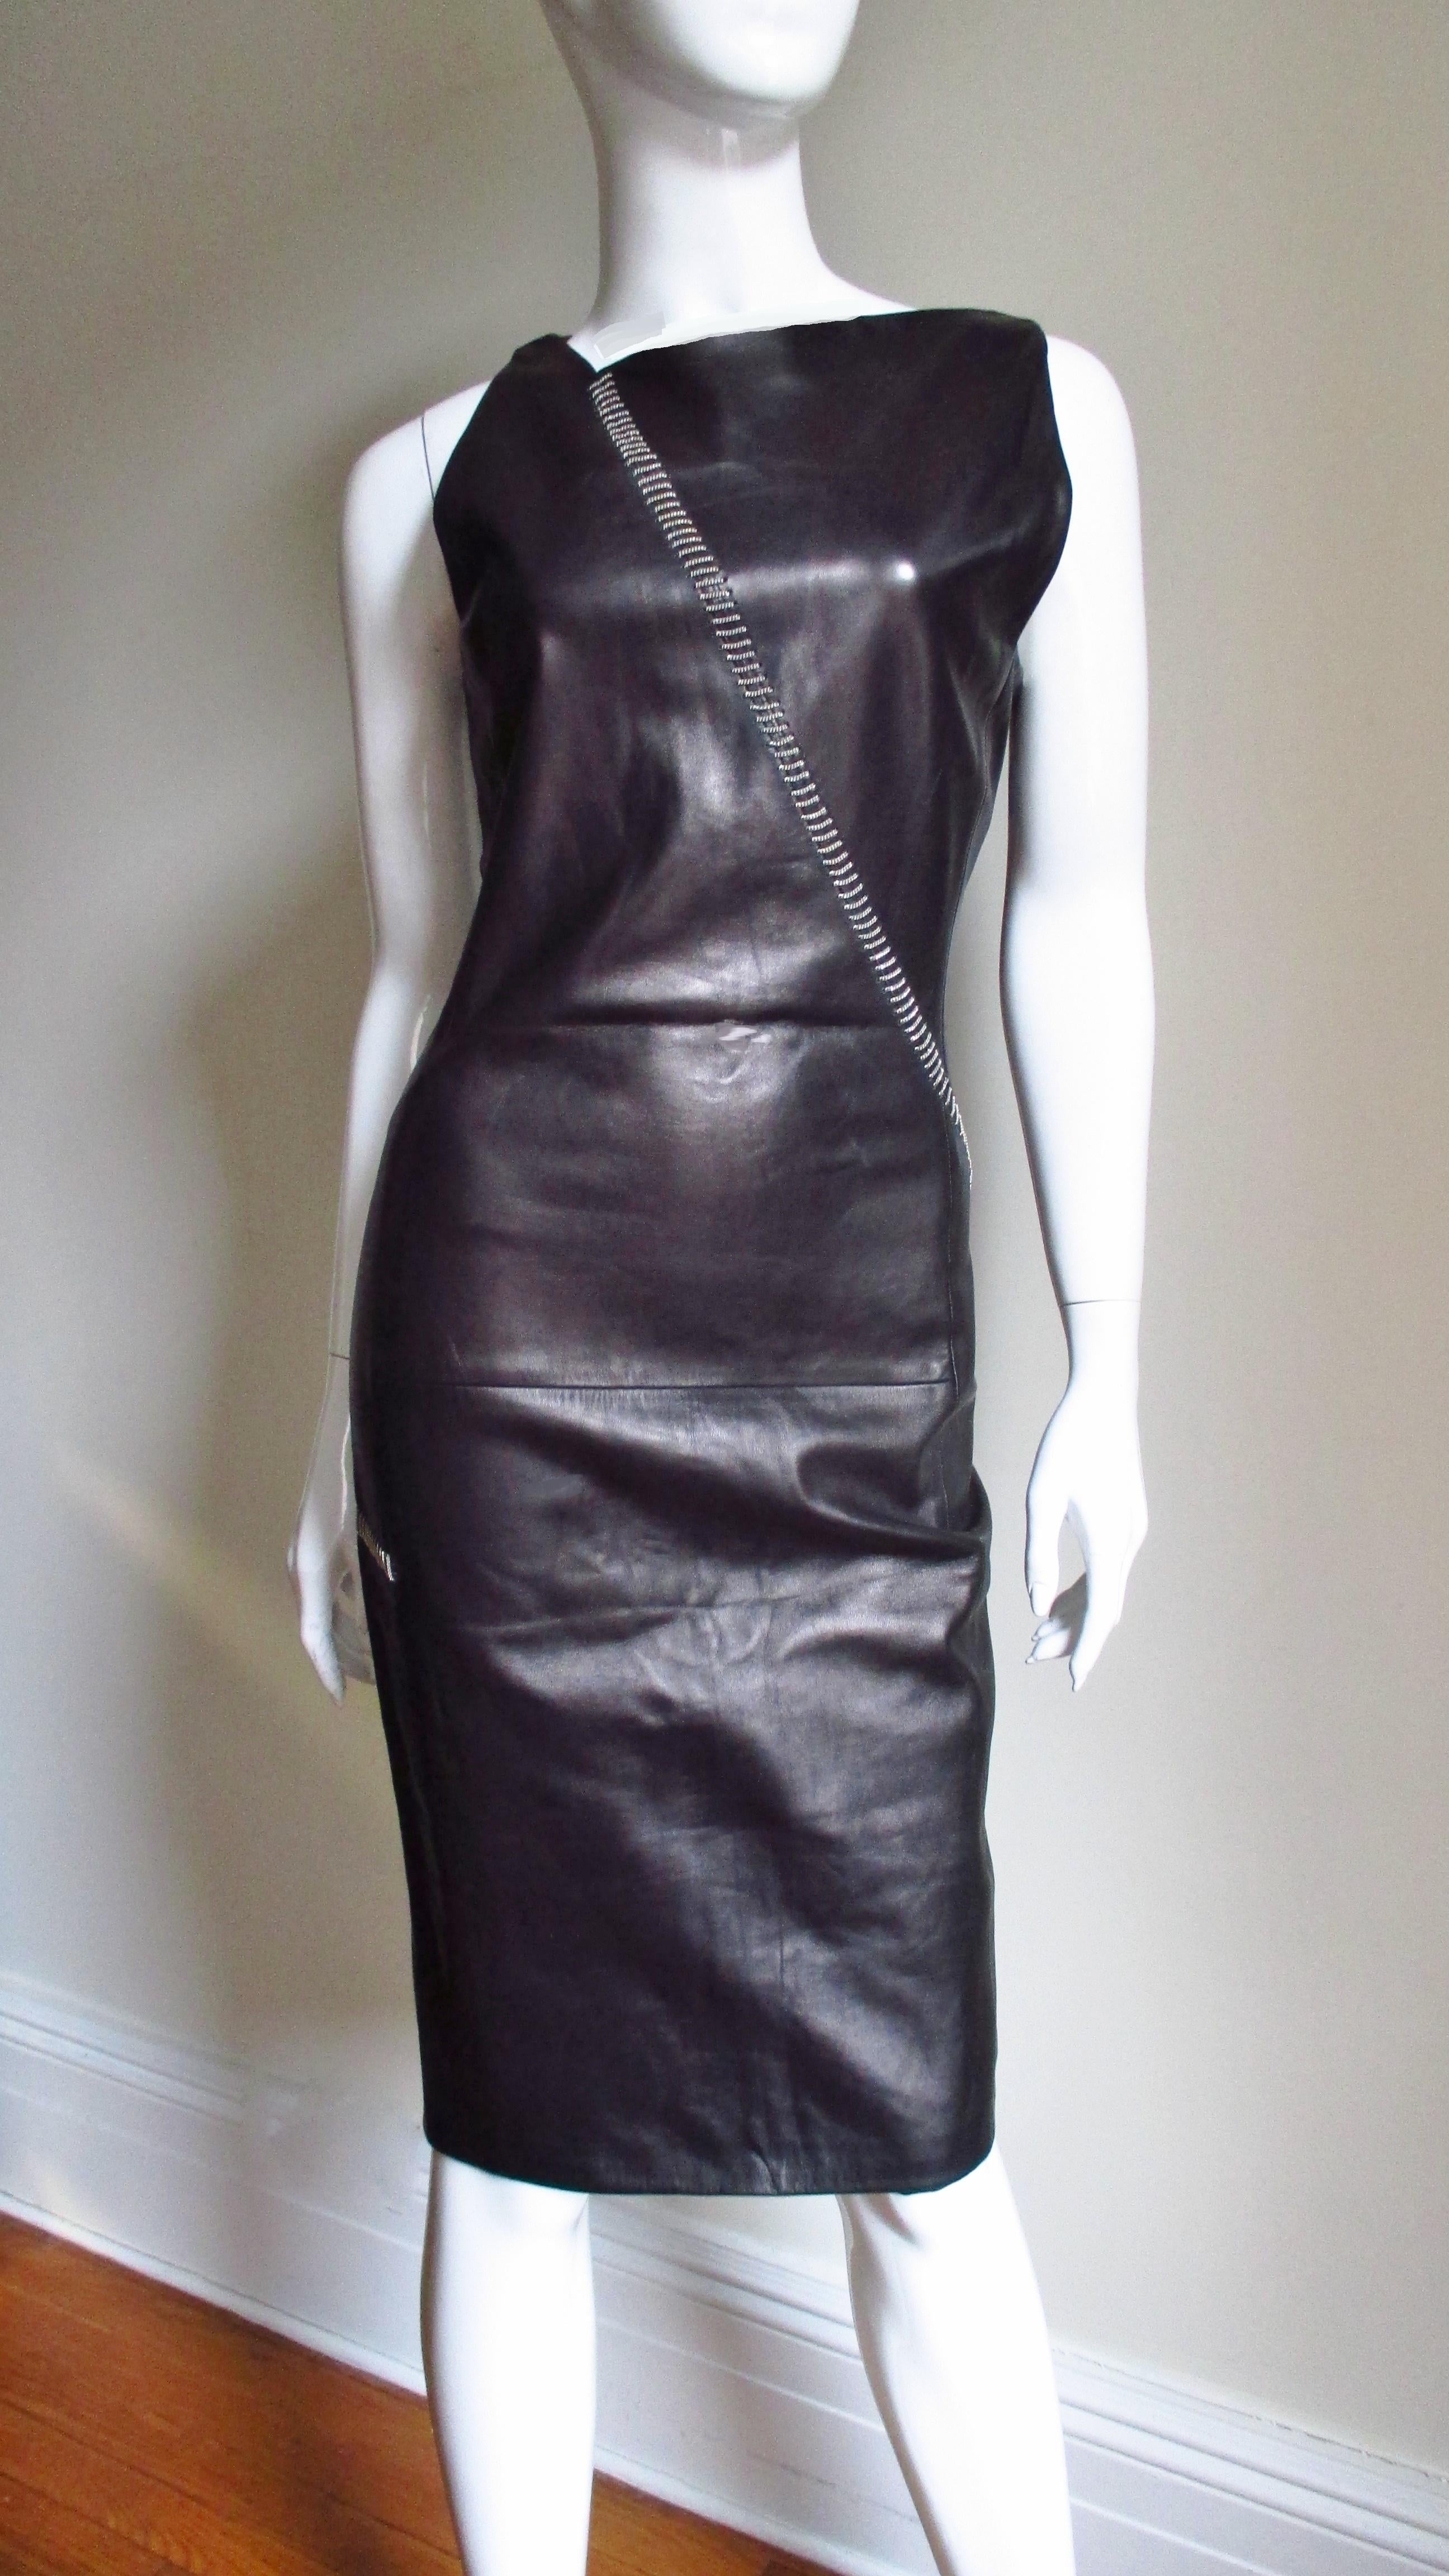 A fabulous black leather dress from Gianni Versace.  It is fitted with an asymmetrical neckline with chain detail starting at one side wrapping around the dress across the hips in the back.  It is fully lined with a back zipper and a center back